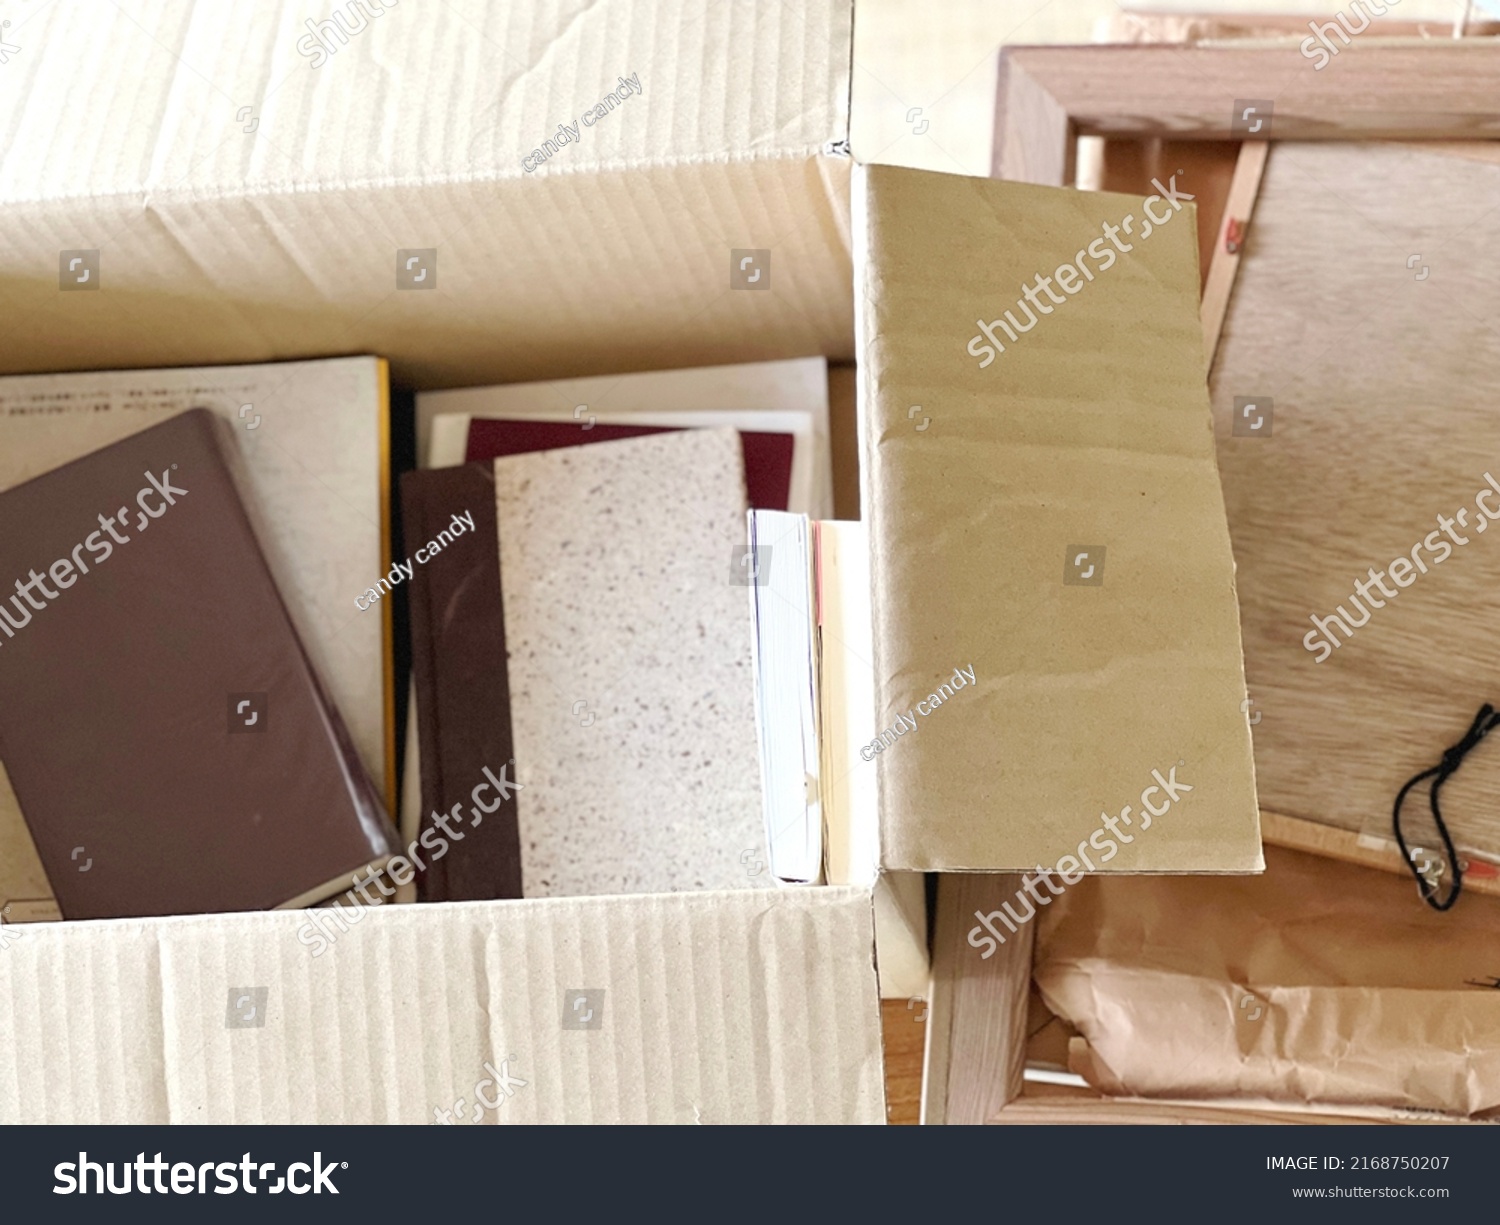 Books and frames in a cardboard box in bird's-eye view #2168750207